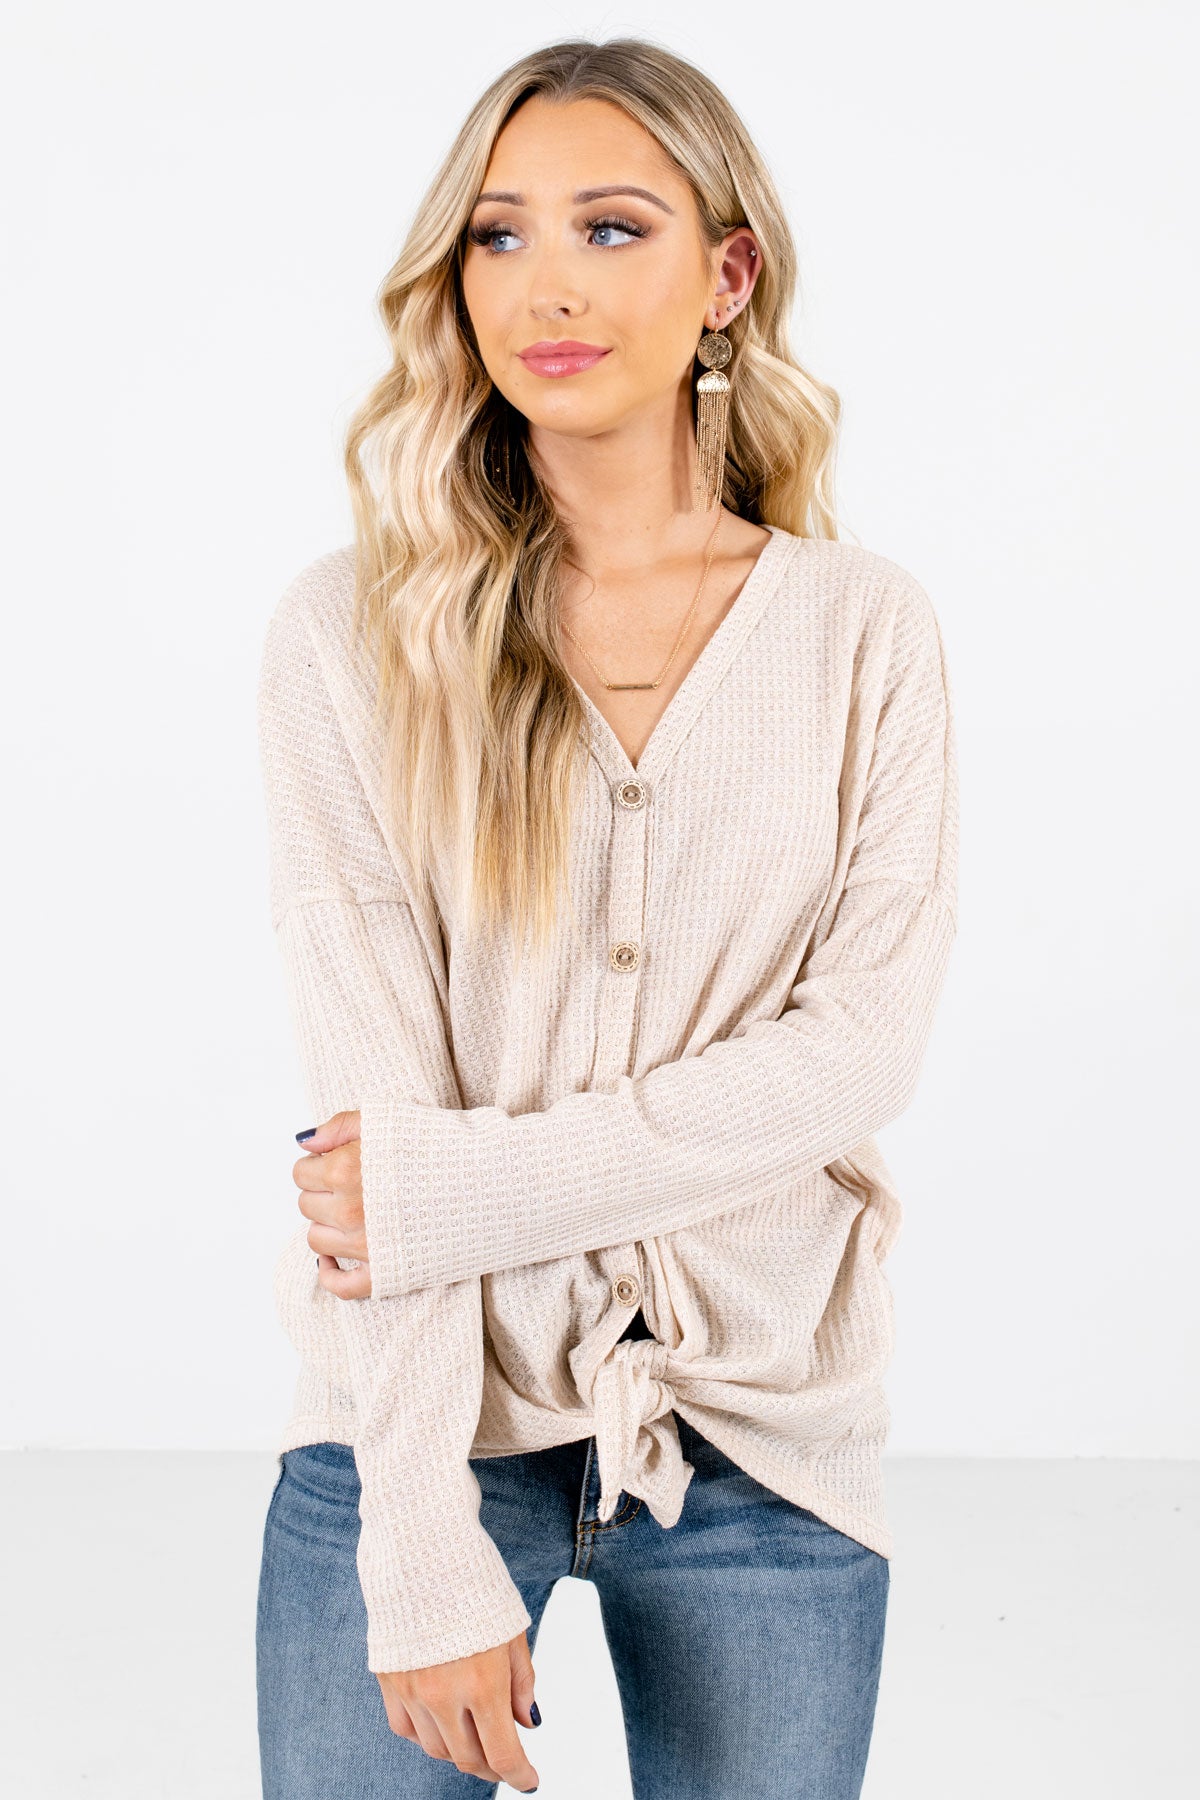 Women's Beige Casual Everyday Boutique Tops